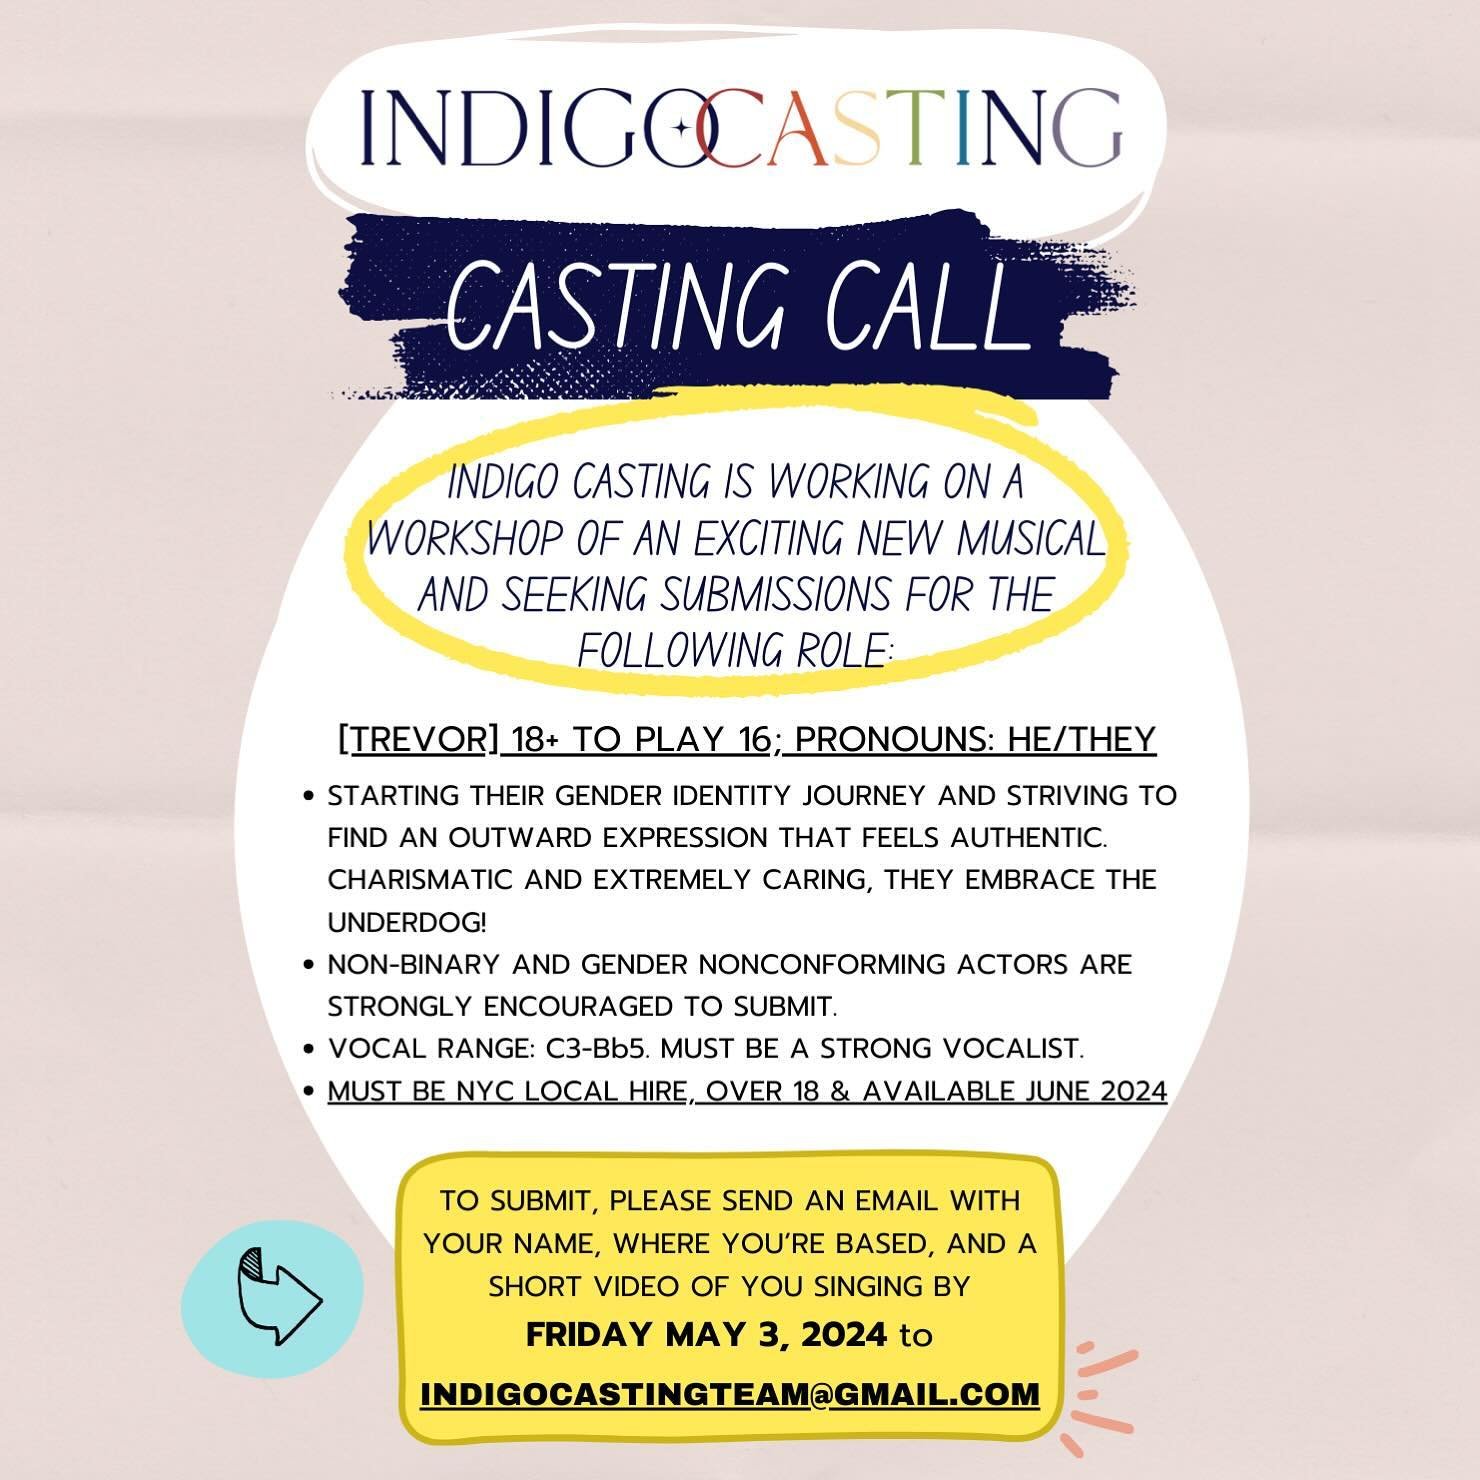 CASTING CALL! Check out the flyer for all the information about what we&rsquo;re looking for and how to submit. Flyer text is below. PLEASE SHARE!

INDIGO CASTING IS WORKING ON A
WORKSHOP OF AN EXCITING NEW MUSICAL AND SEEKING SUBMISSIONS FOR THE FOL